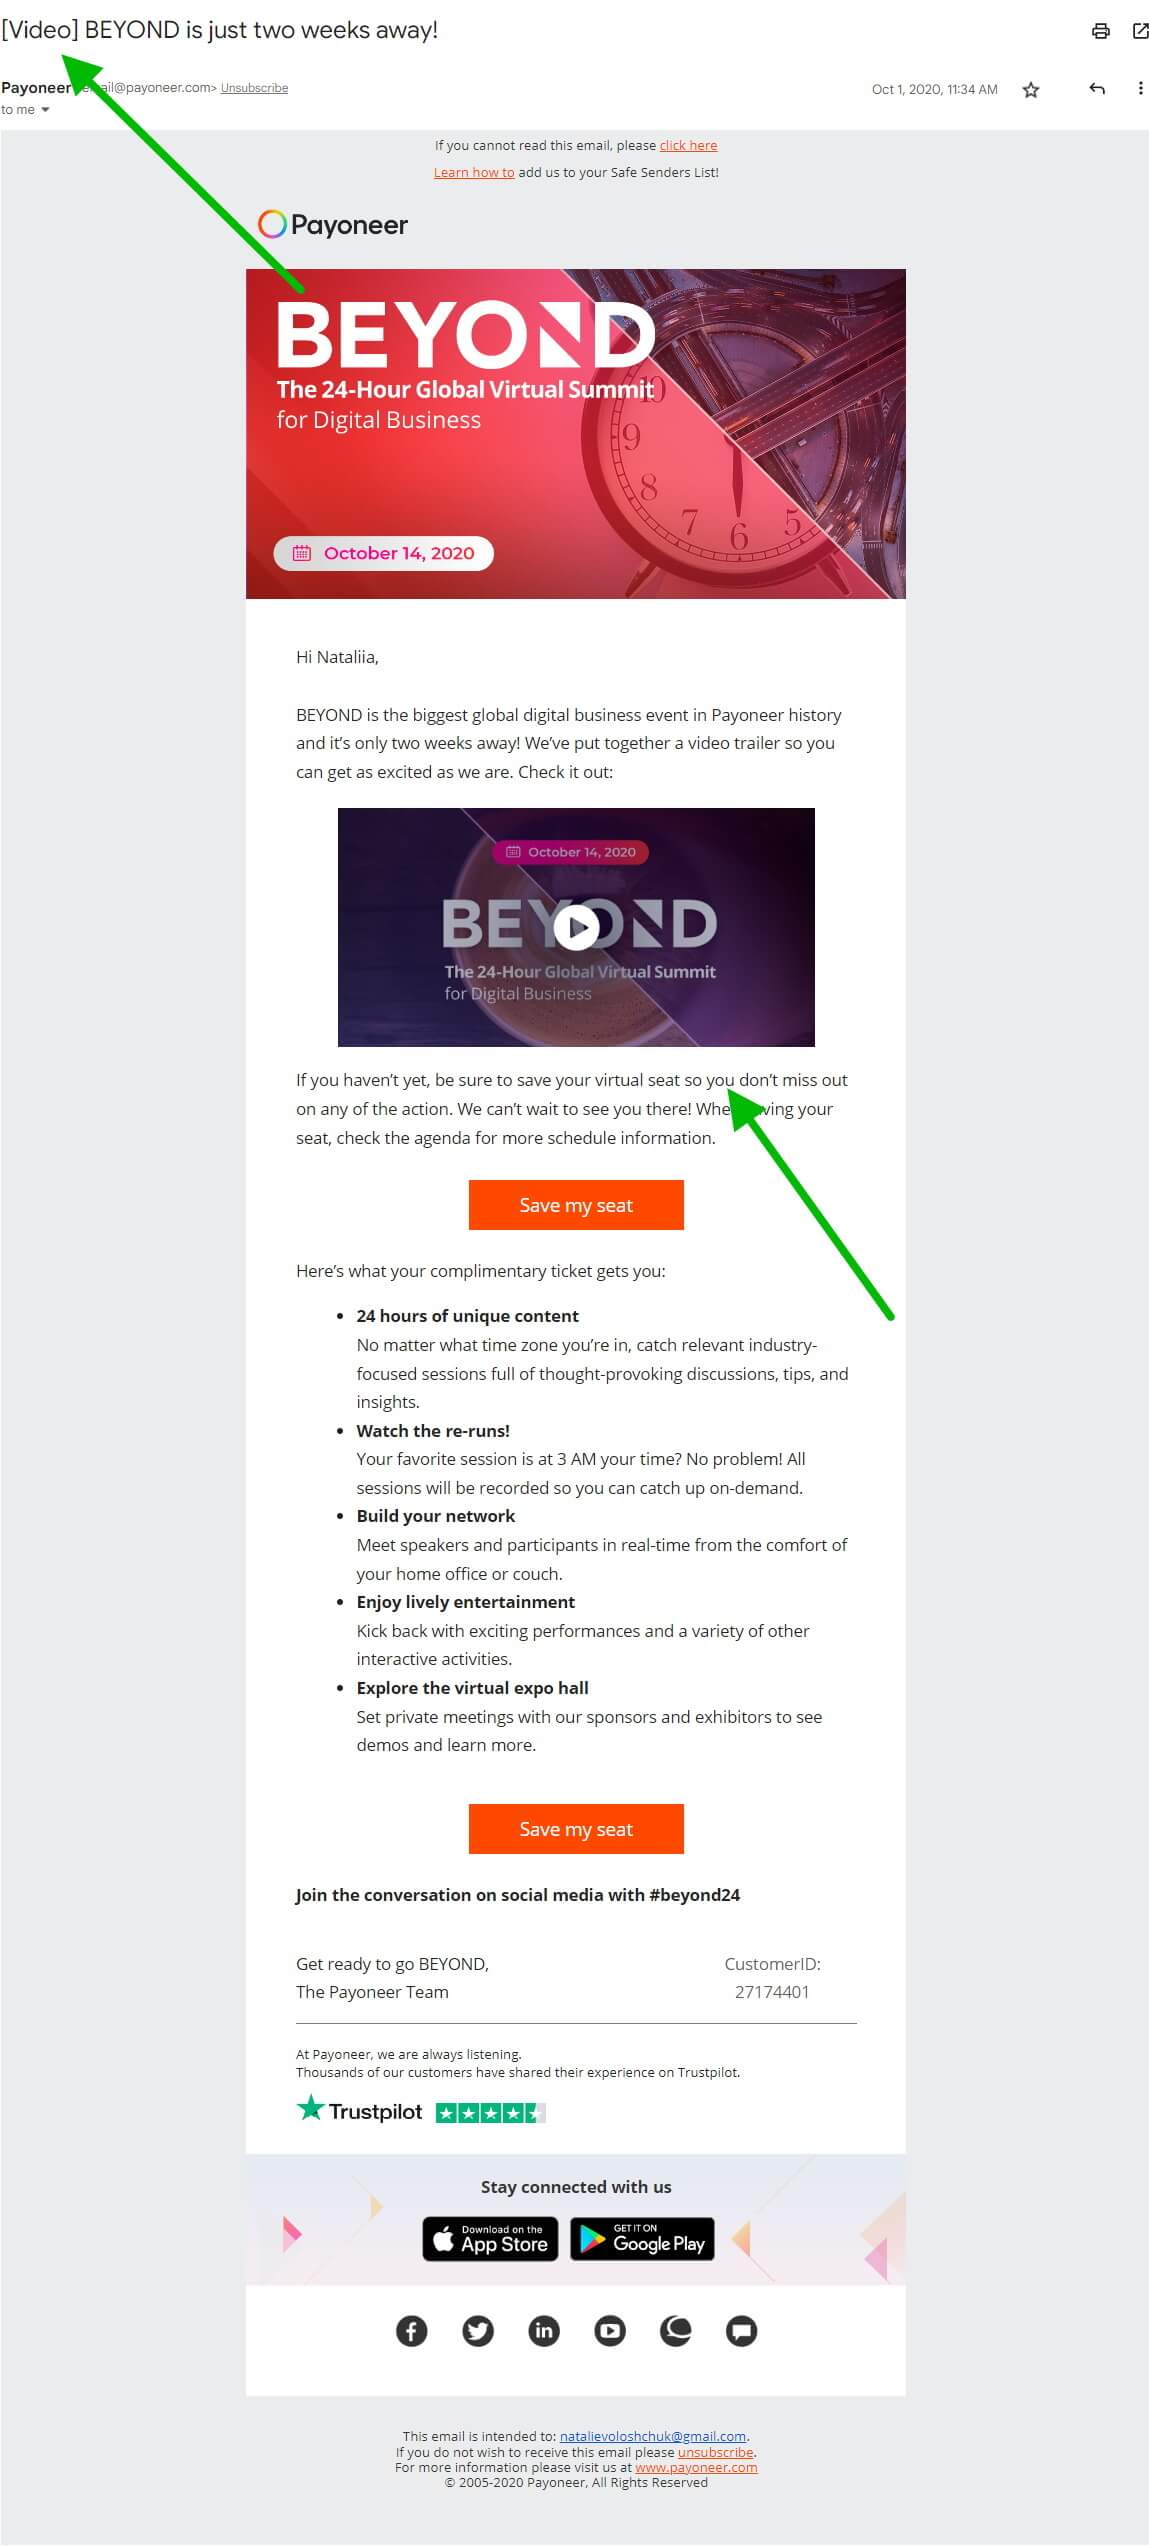 Video in an email: an email by Payoneer with a “video” made by an image with a Play button.